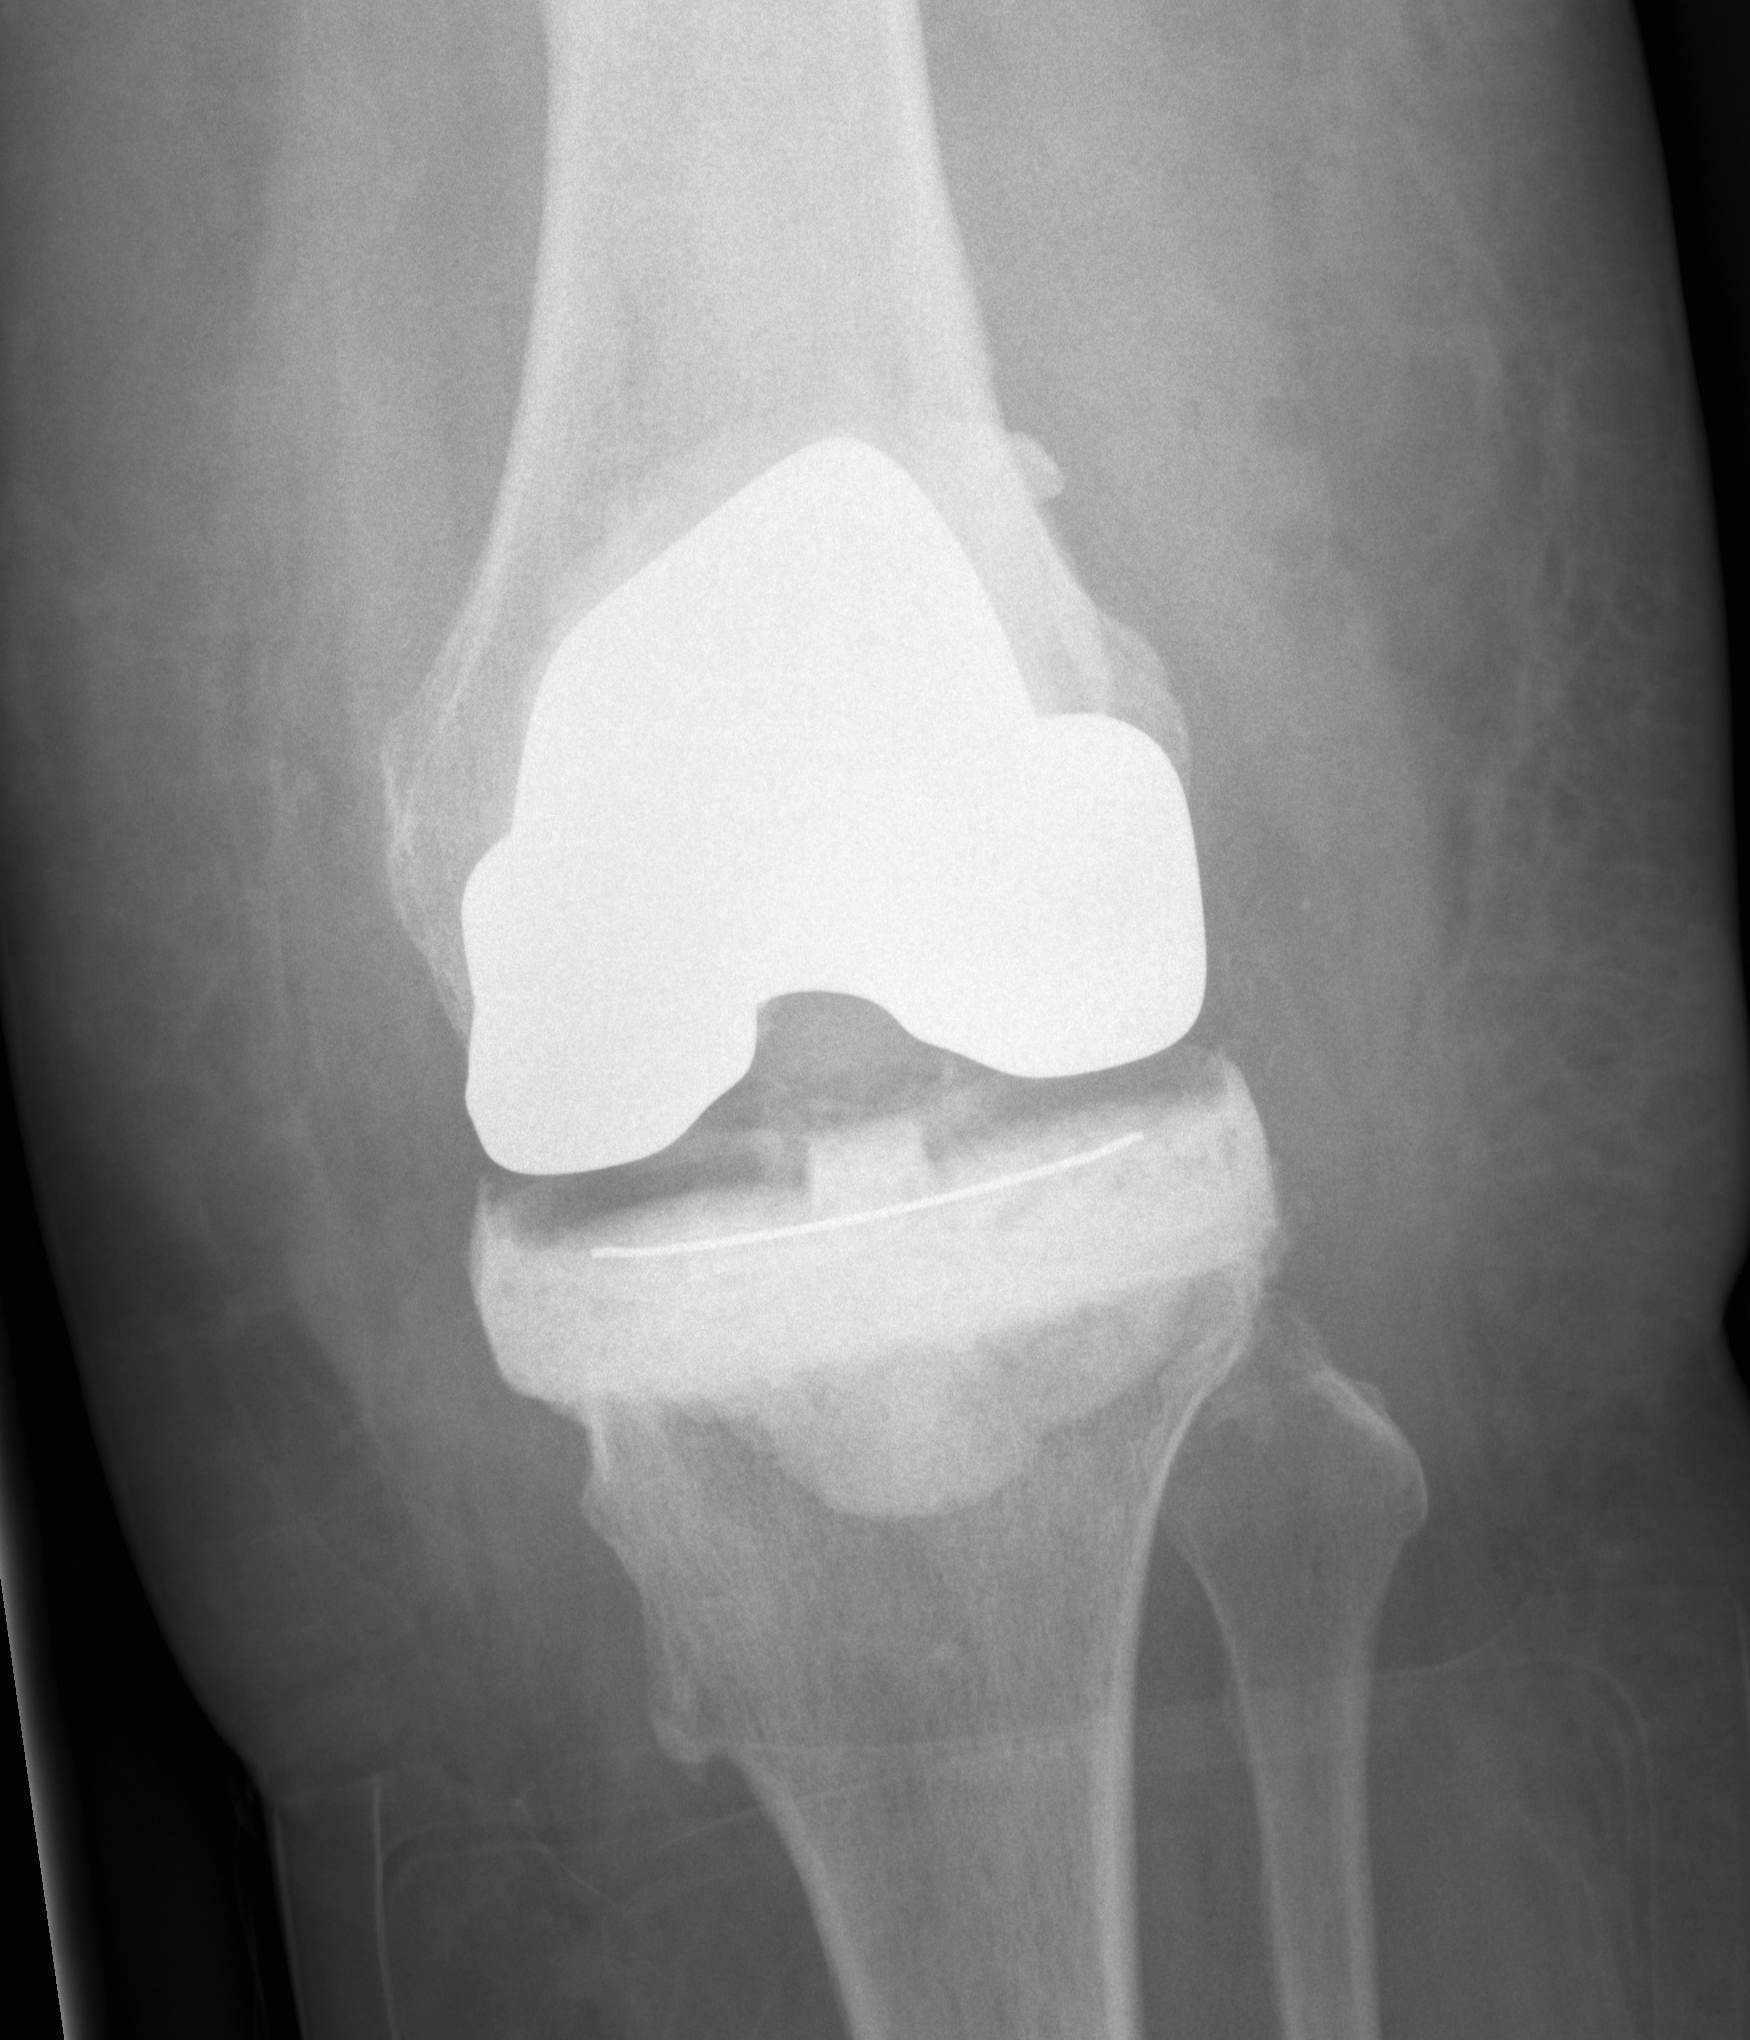 Infected TKR Autoclave Femur Cement Tibia AP